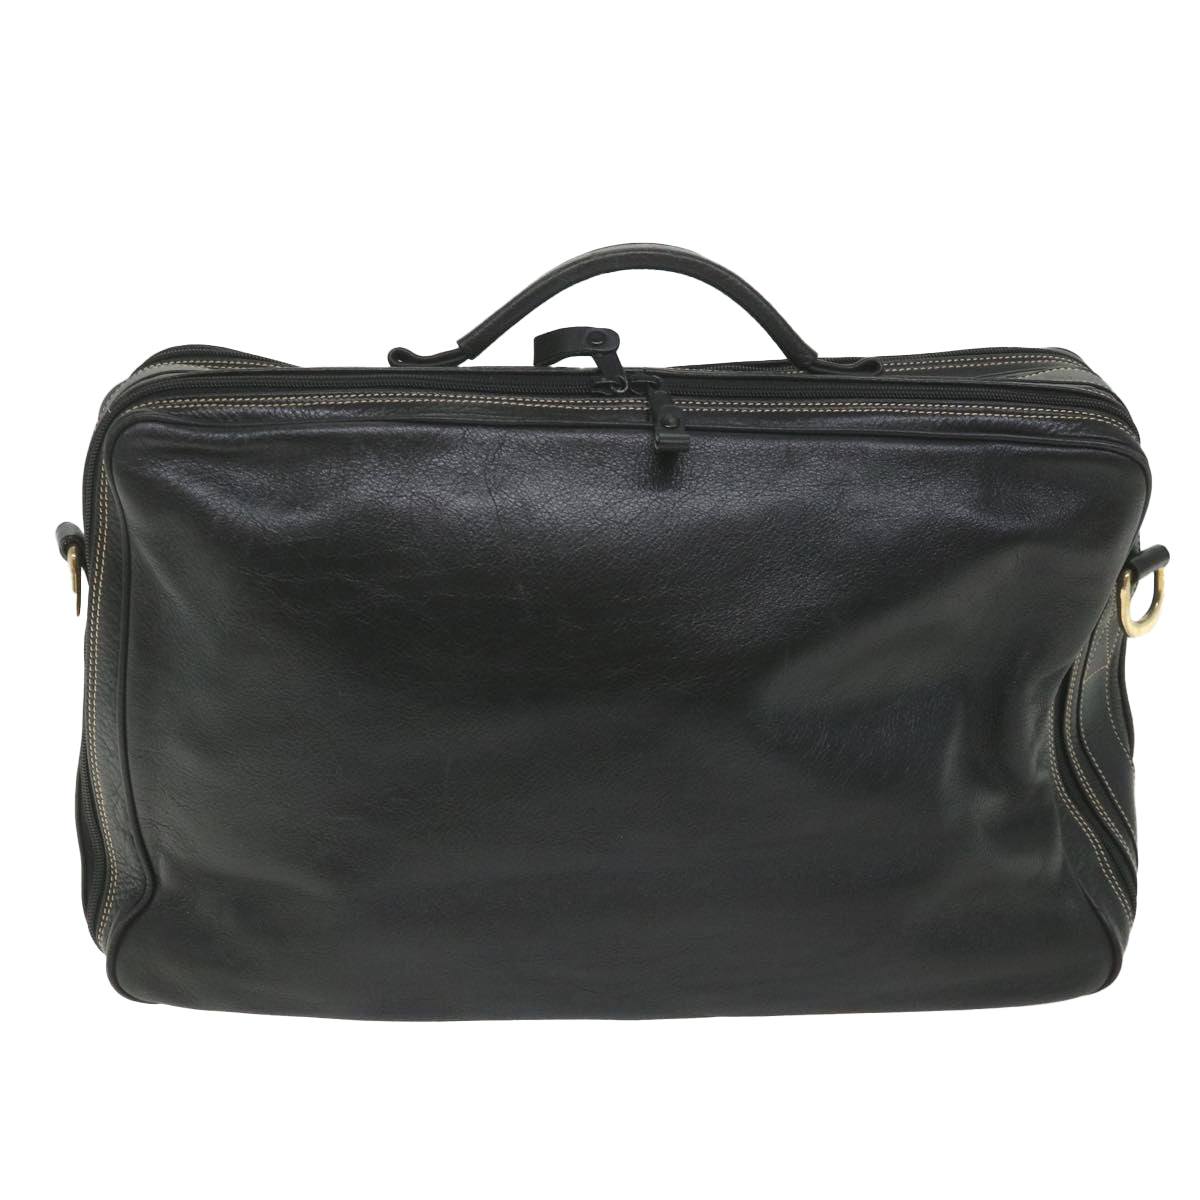 BALLY Business Bag Leather Black Auth bs9840 - 0